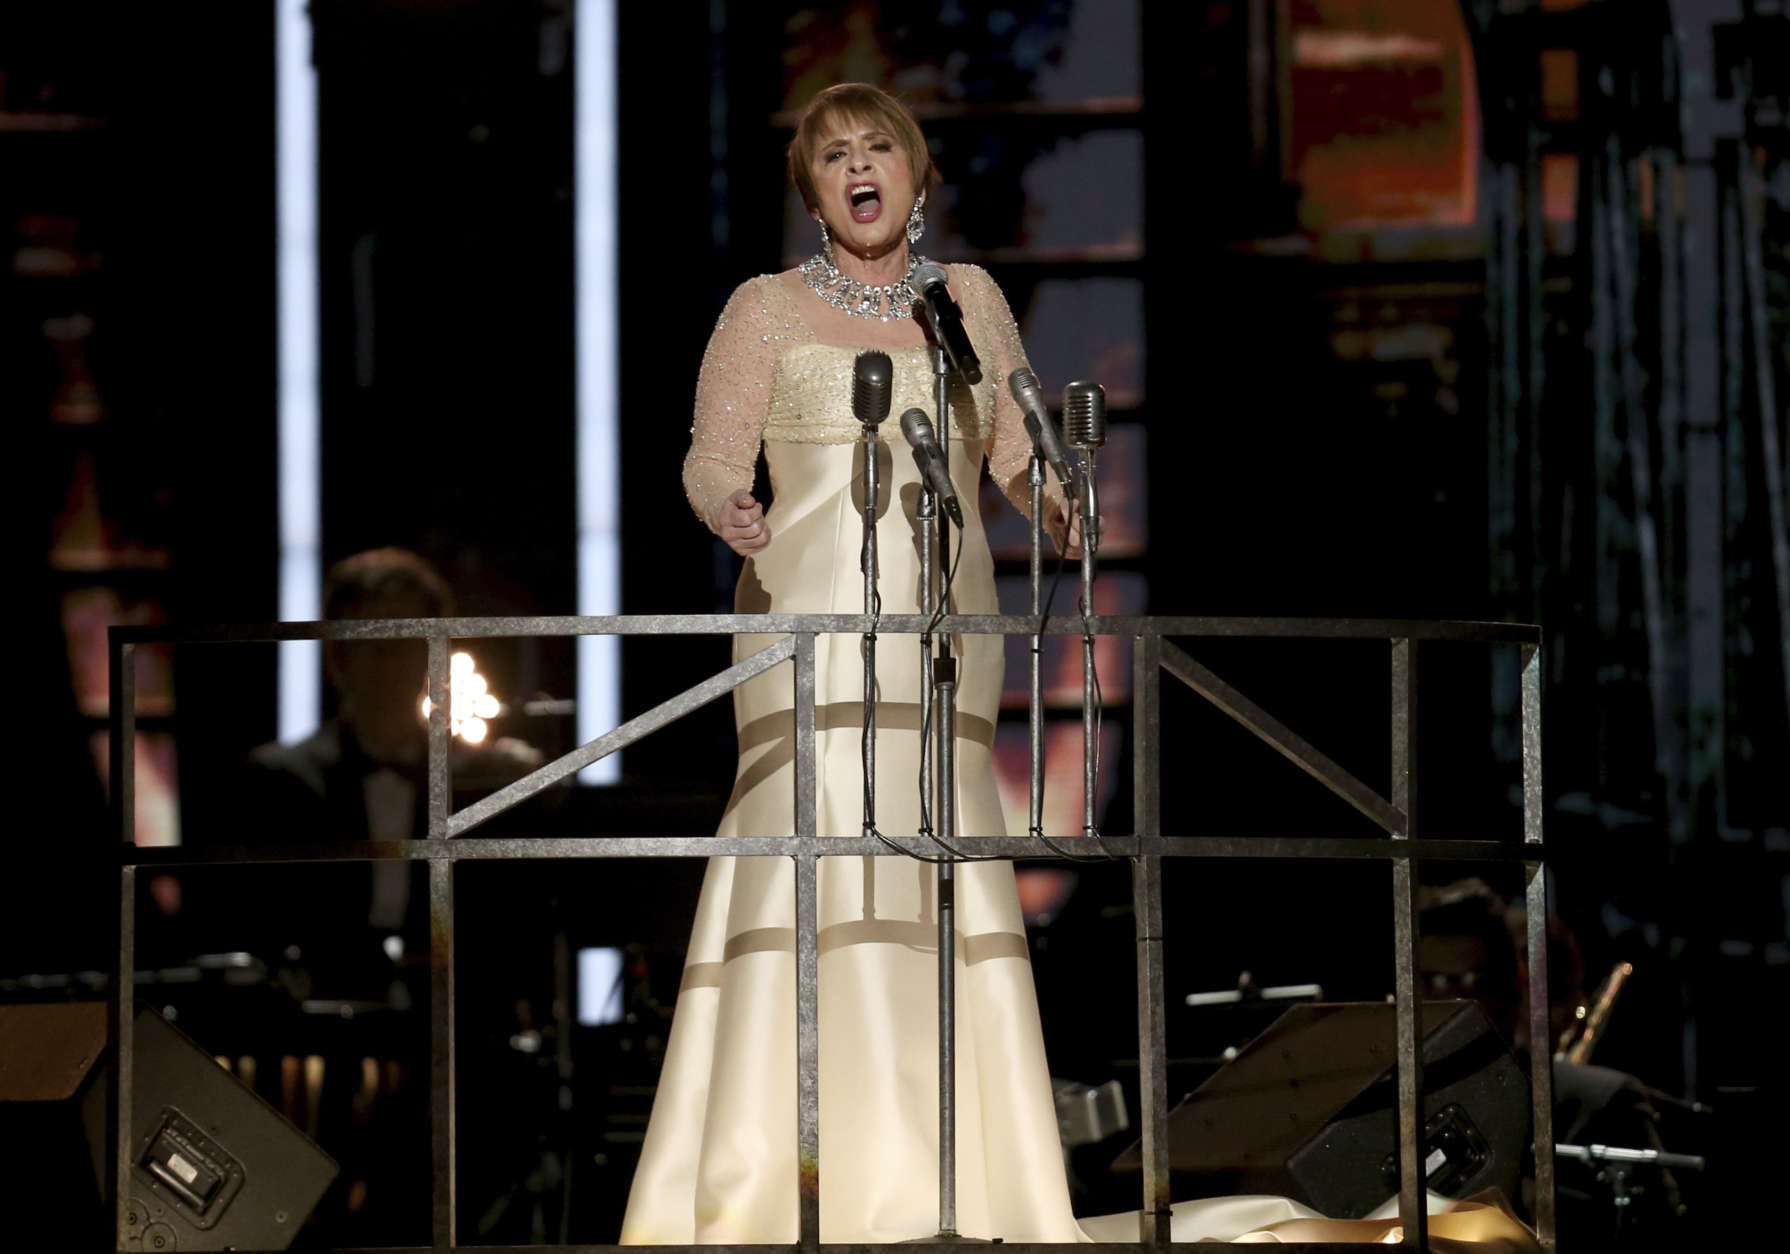 Patti LuPone performs "Don't Cry For Me Argentina" during a tribute to Leonard Bernstein and Andrew Lloyd Webber at the 60th annual Grammy Awards at Madison Square Garden on Sunday, Jan. 28, 2018, in New York. (Photo by Matt Sayles/Invision/AP)